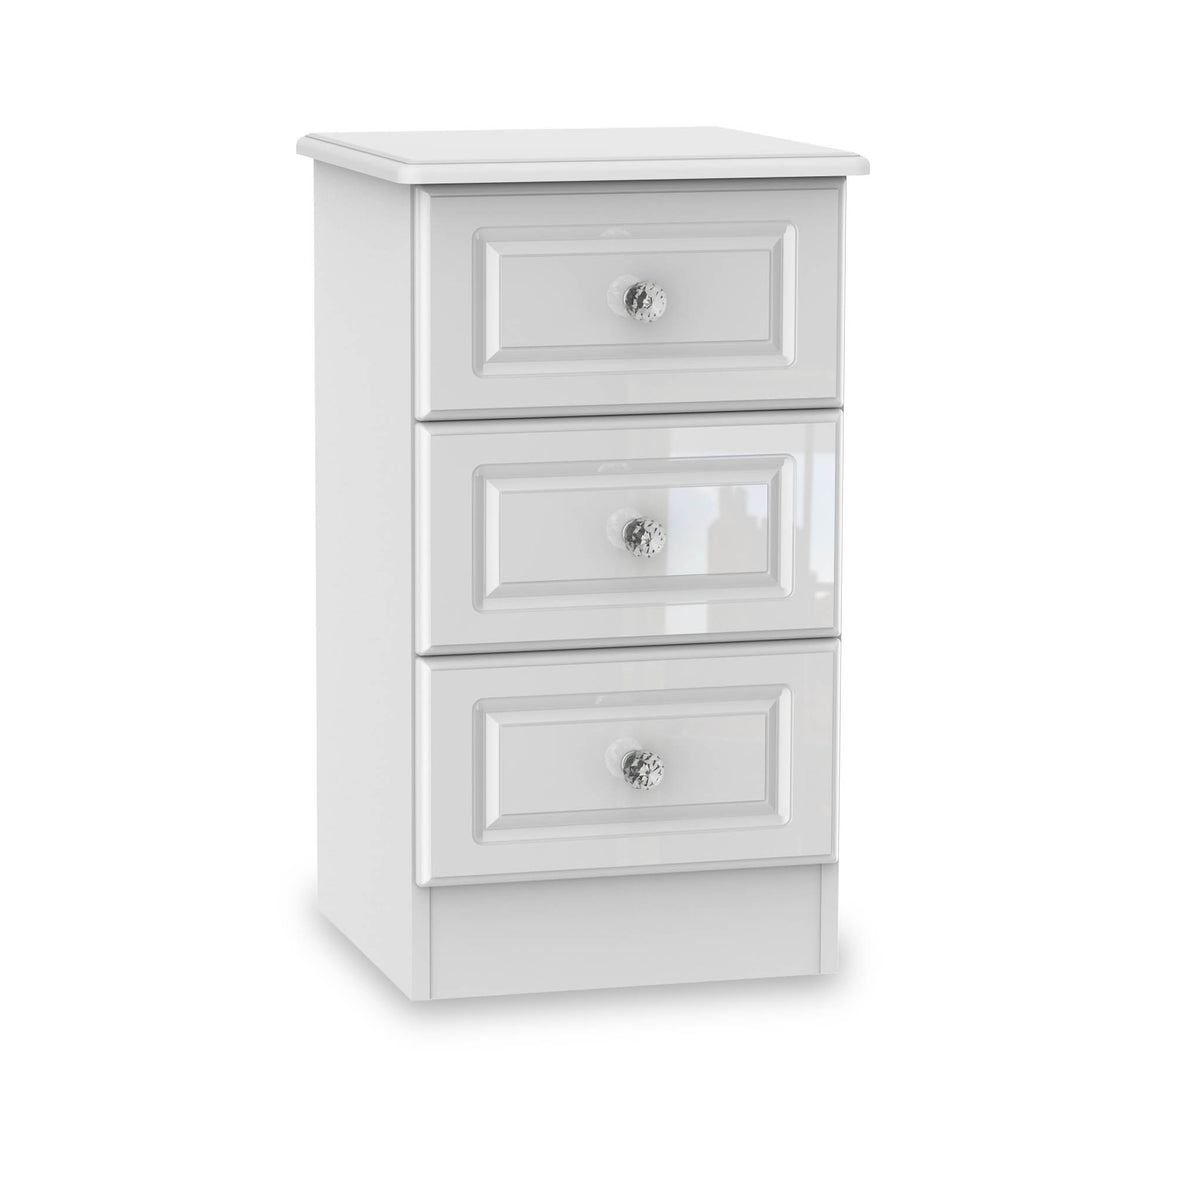 Kinsley White Gloss Wireless Charging 3 Drawer Bedside from Roseland